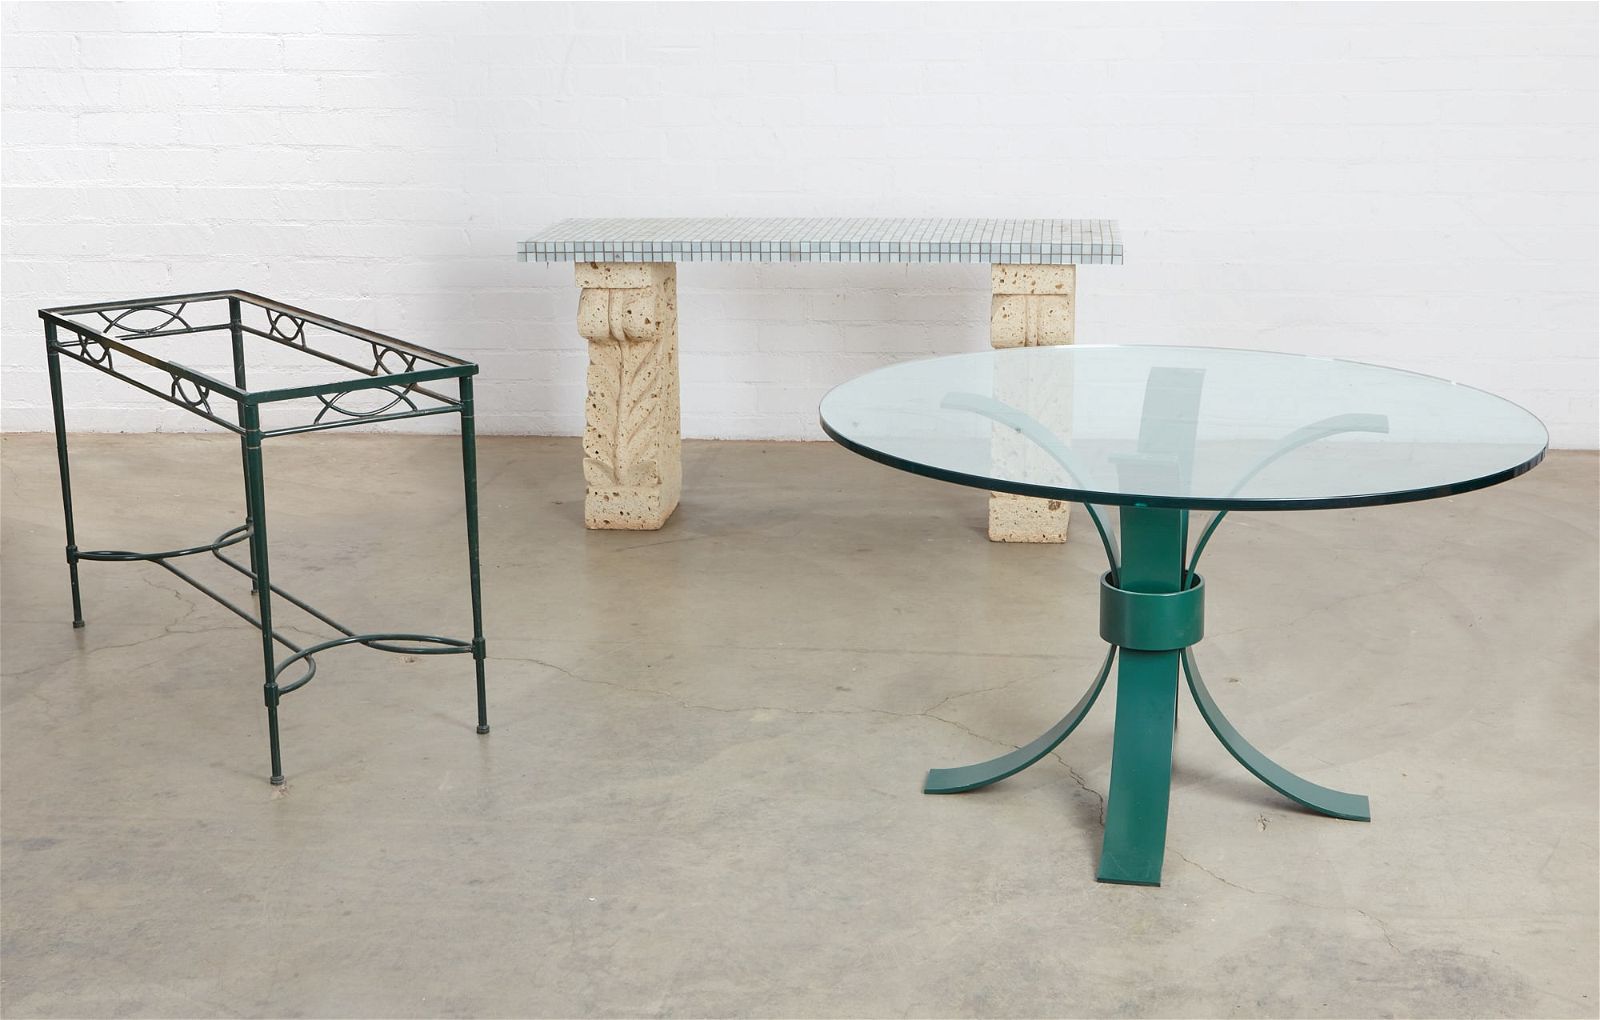 A STONE AND GLASS TABLE, A TABLE